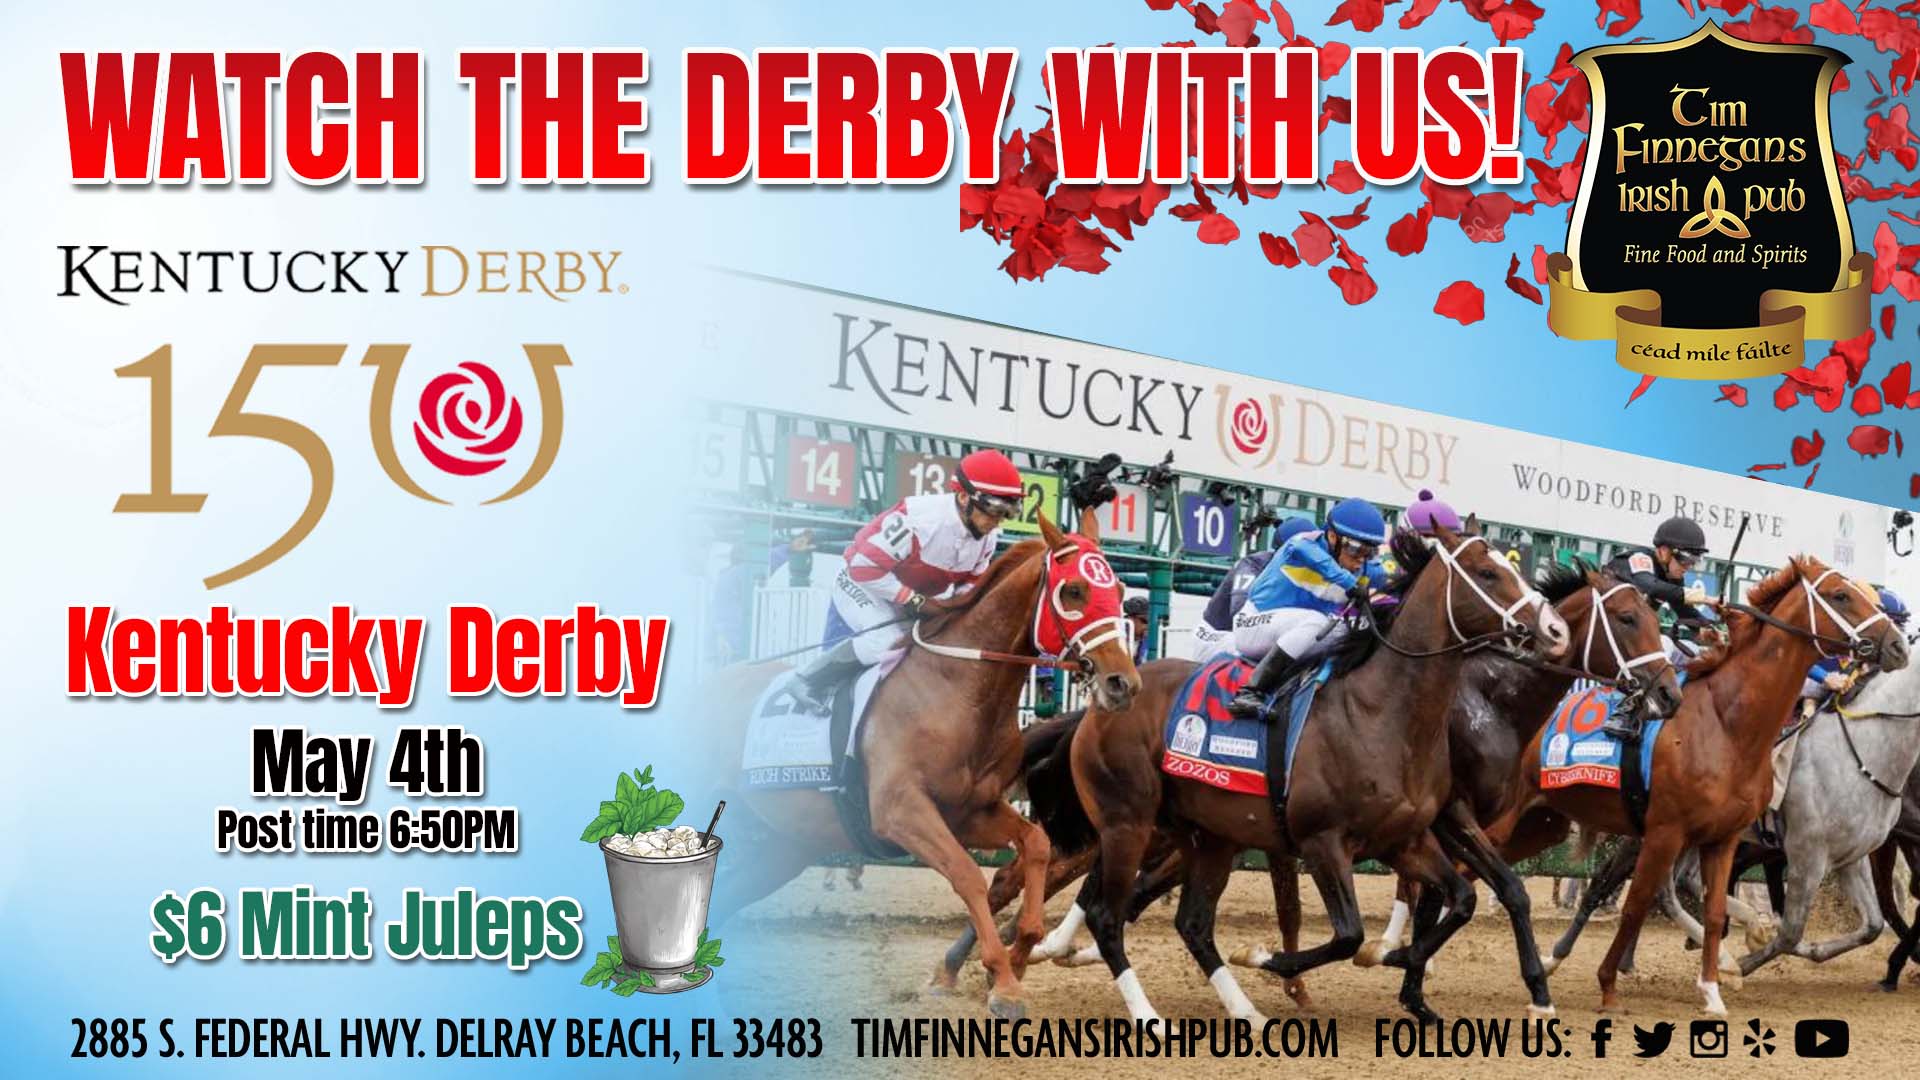 Join us to watch the Kentucky Derby - May 4th - Post time 6:50pm. $6 Mint Juleps